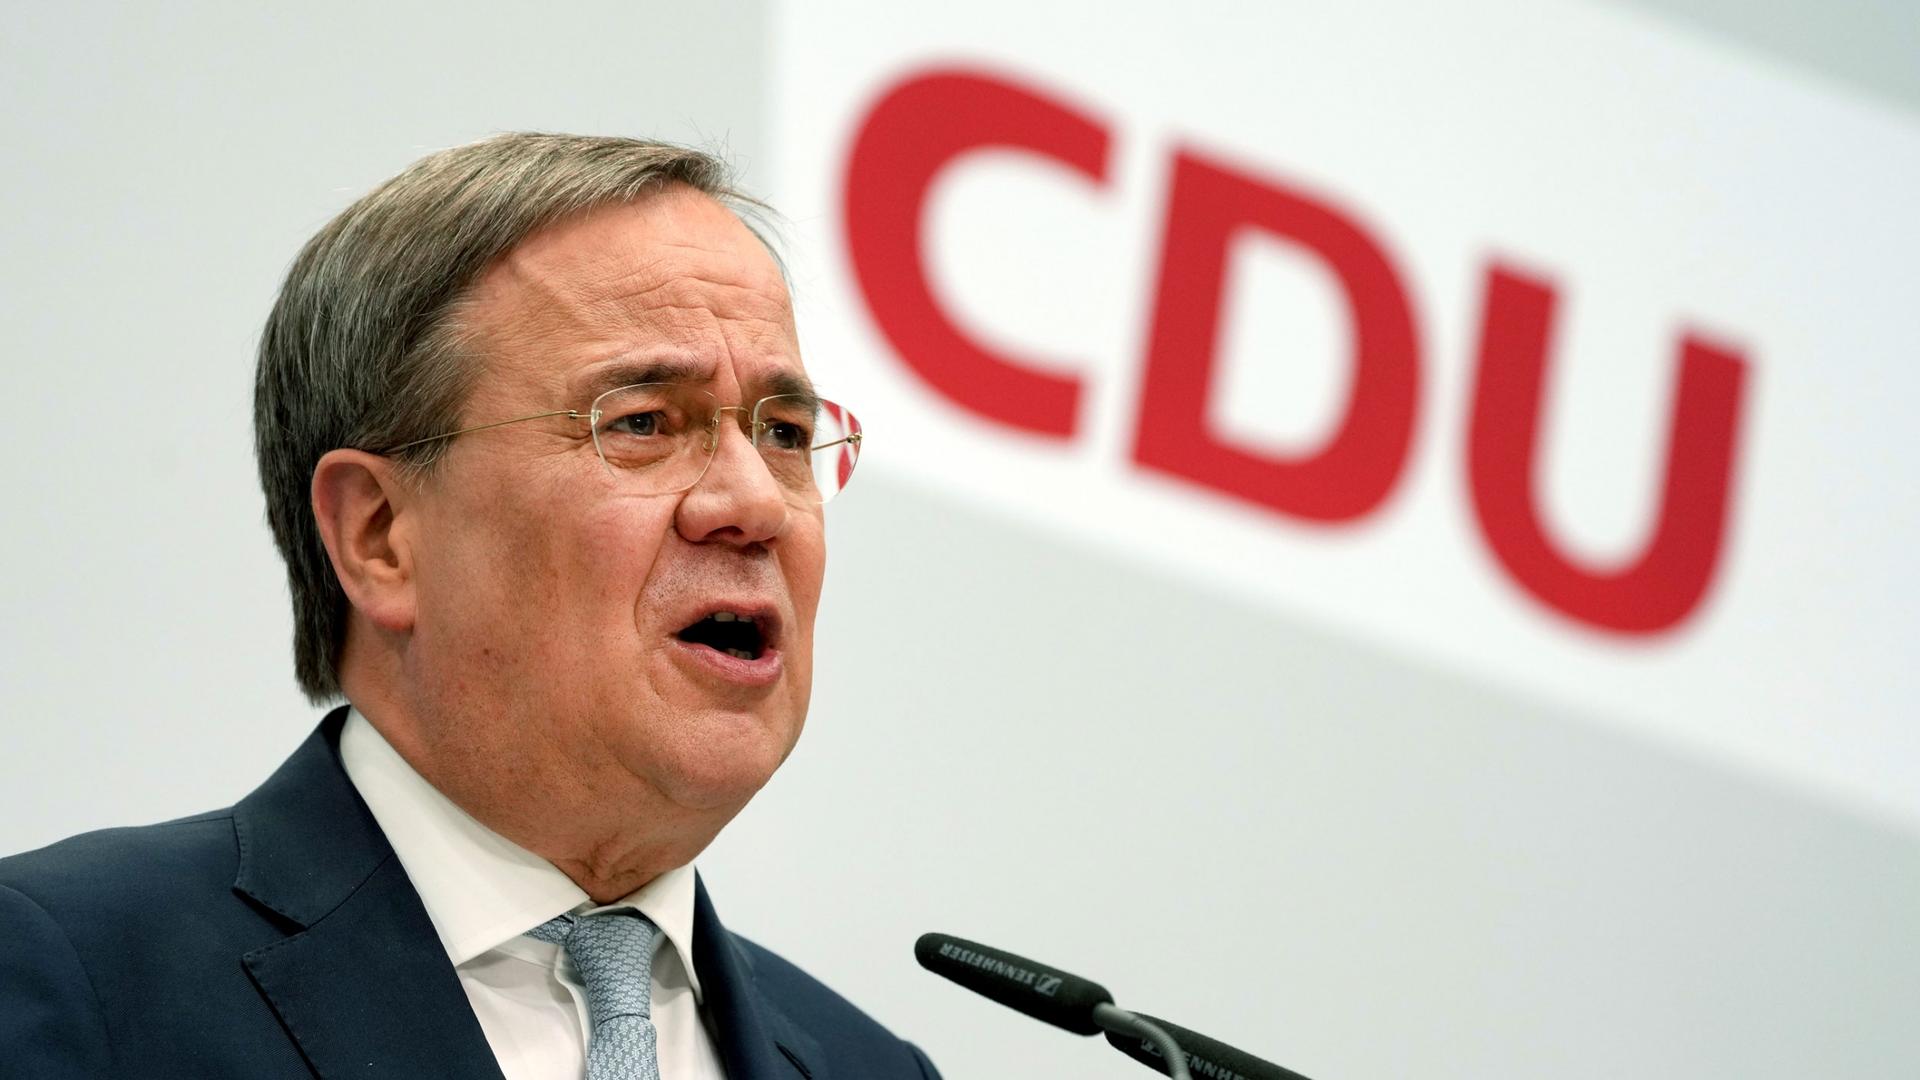 Armin Laschet, chairman of the German Christian Democratic Union, CDU, addresses the media during a press conference at the party's headquarters in Berlin, Germany, Monday, May 17, 2021. 